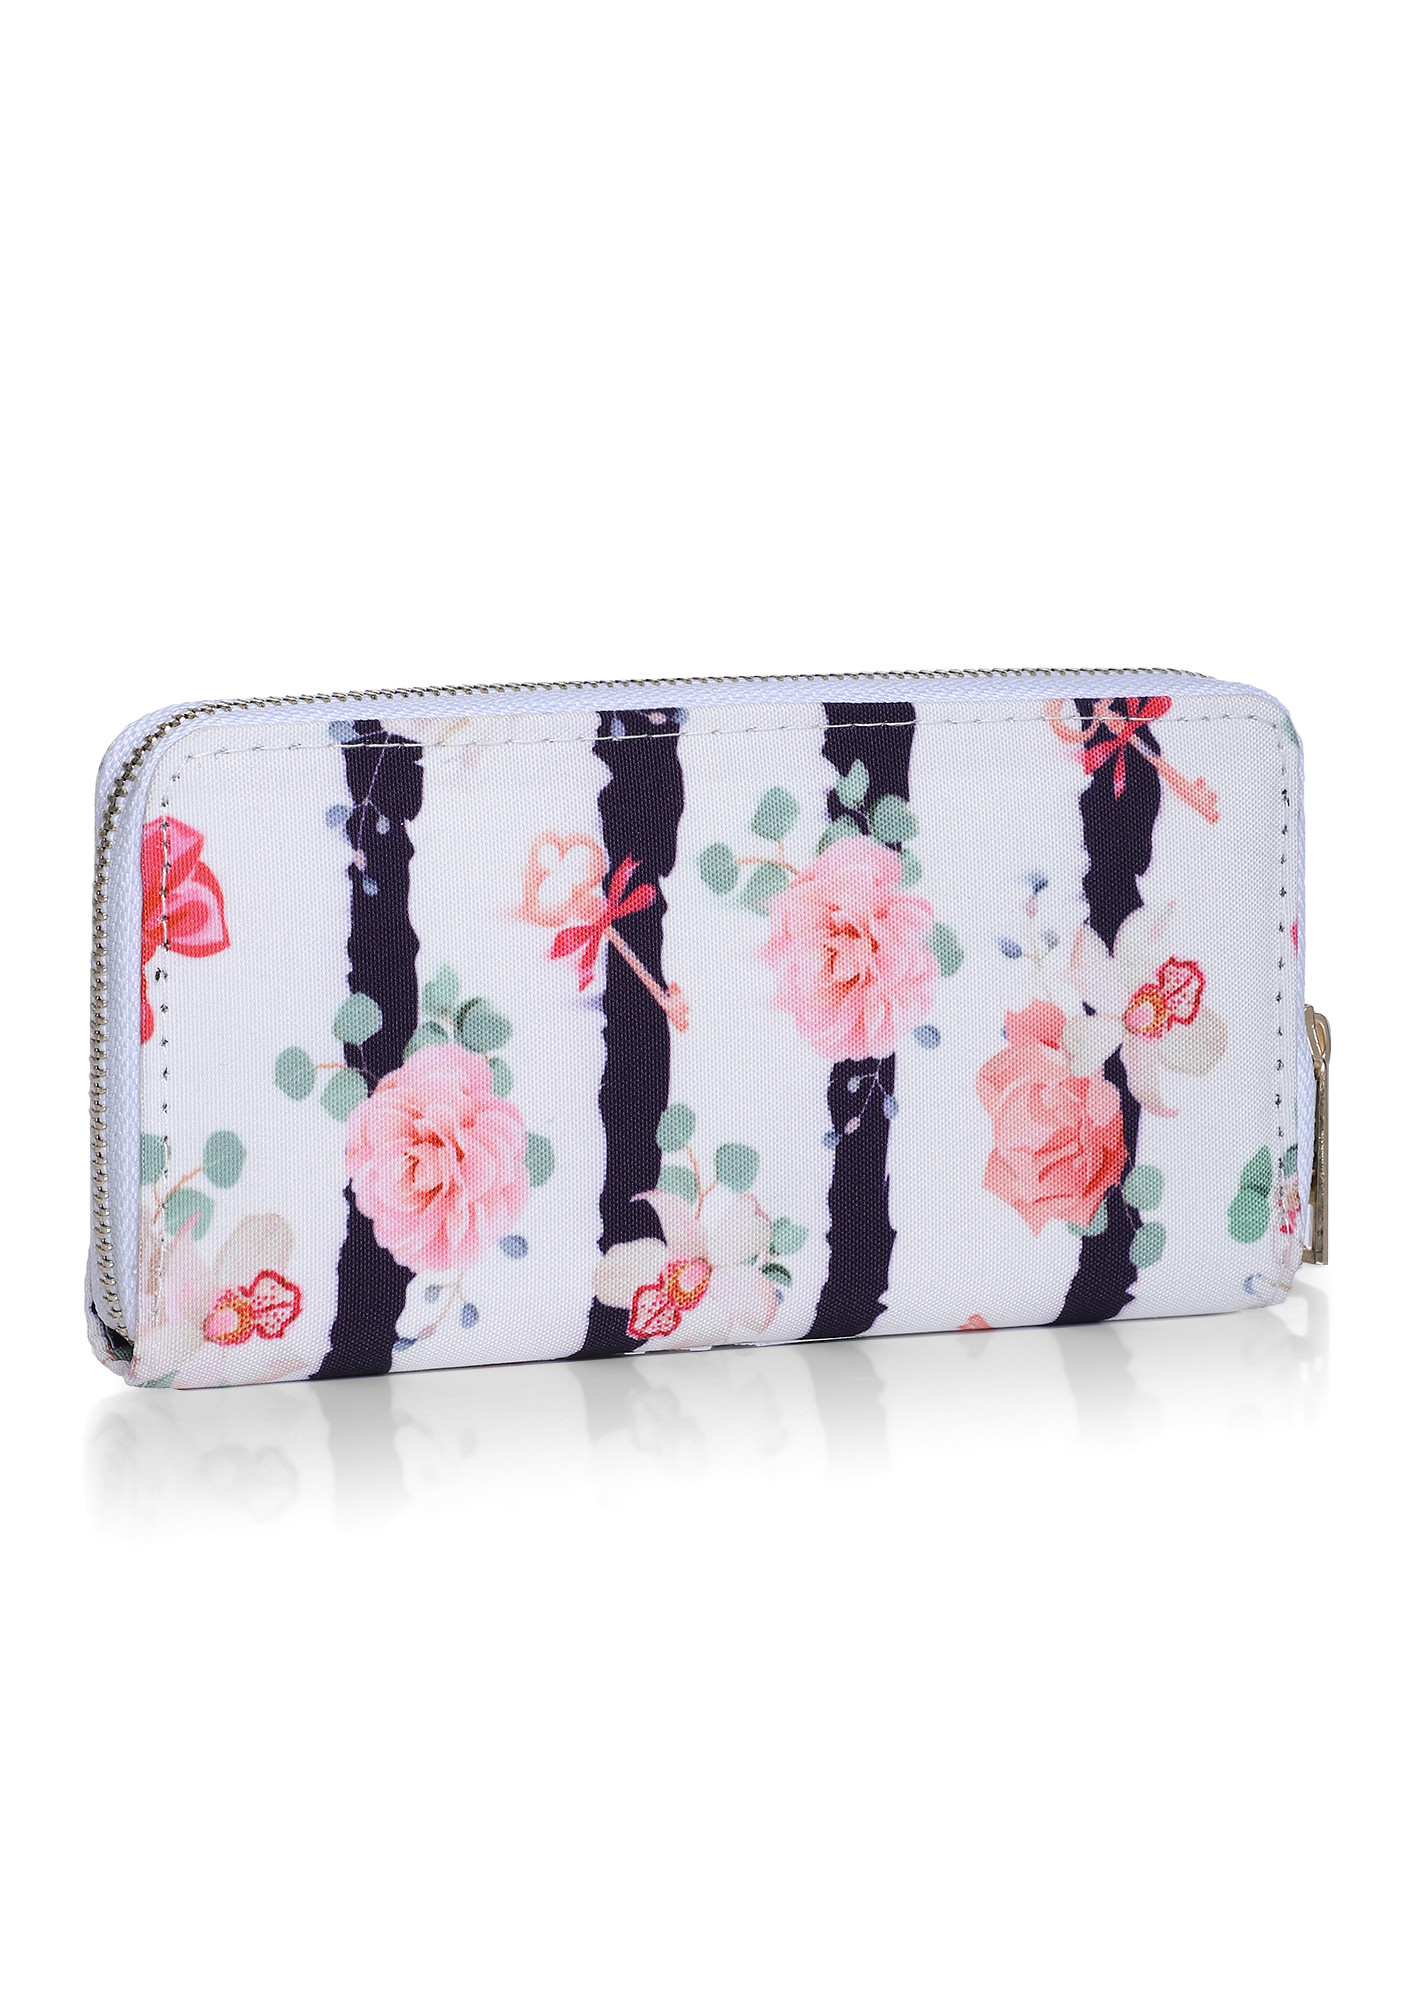 ALL THINGS PEACHY WHITE WALLET